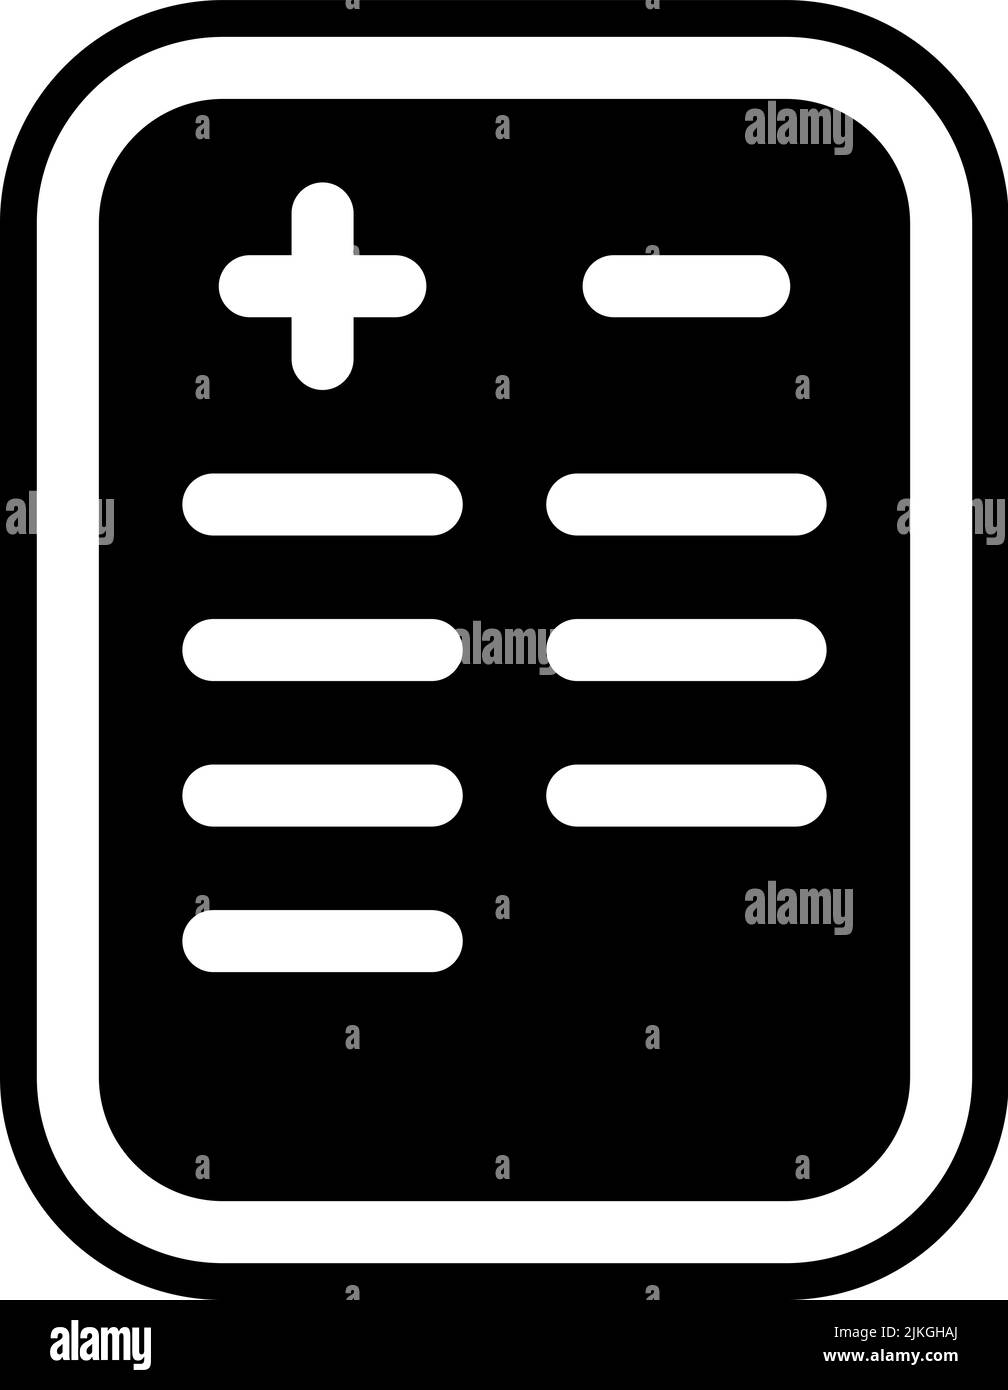 pros and cons icon black vector illustration. Stock Vector